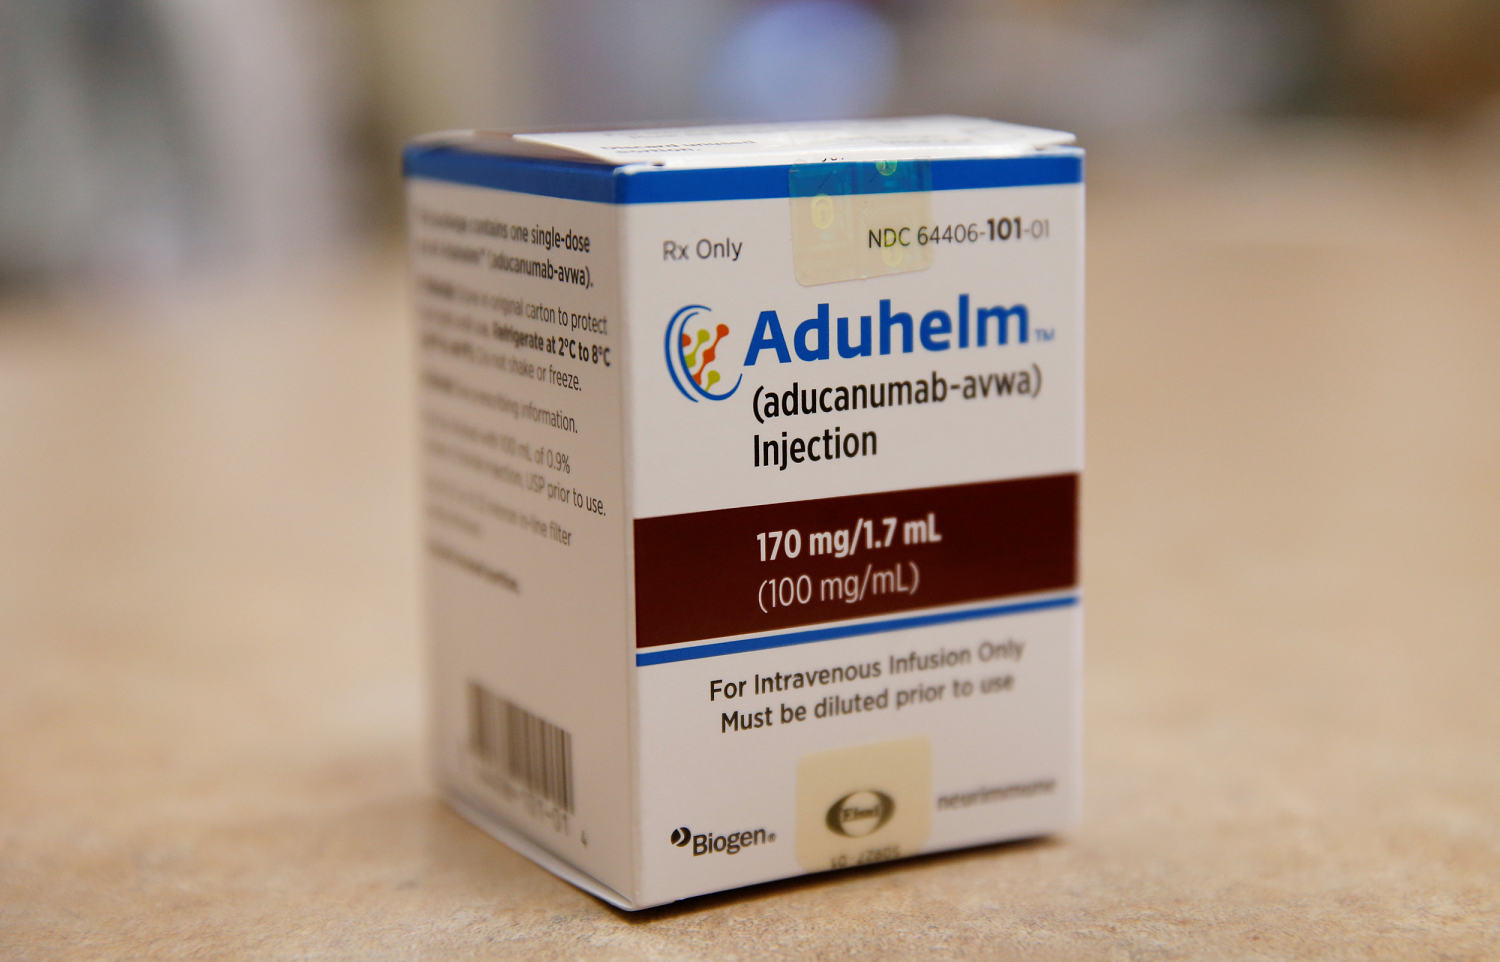 Biogen to stop selling controversial Alzheimer's drug Aduhelm